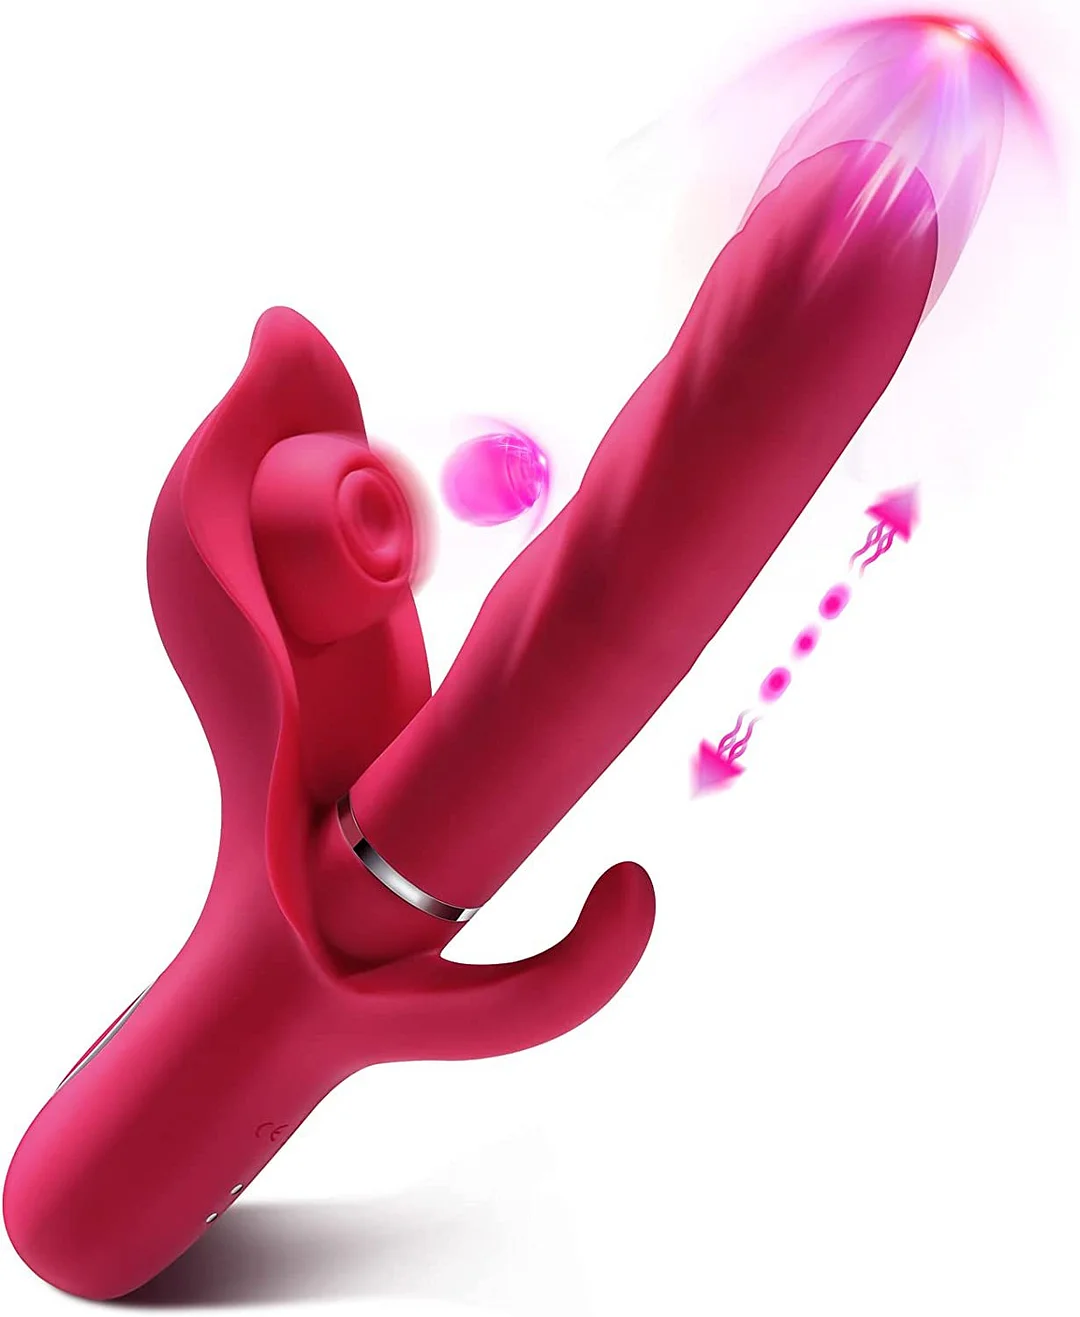 3-in-1 Tapping Thrusting G-spot Vibrator - Rose Toy